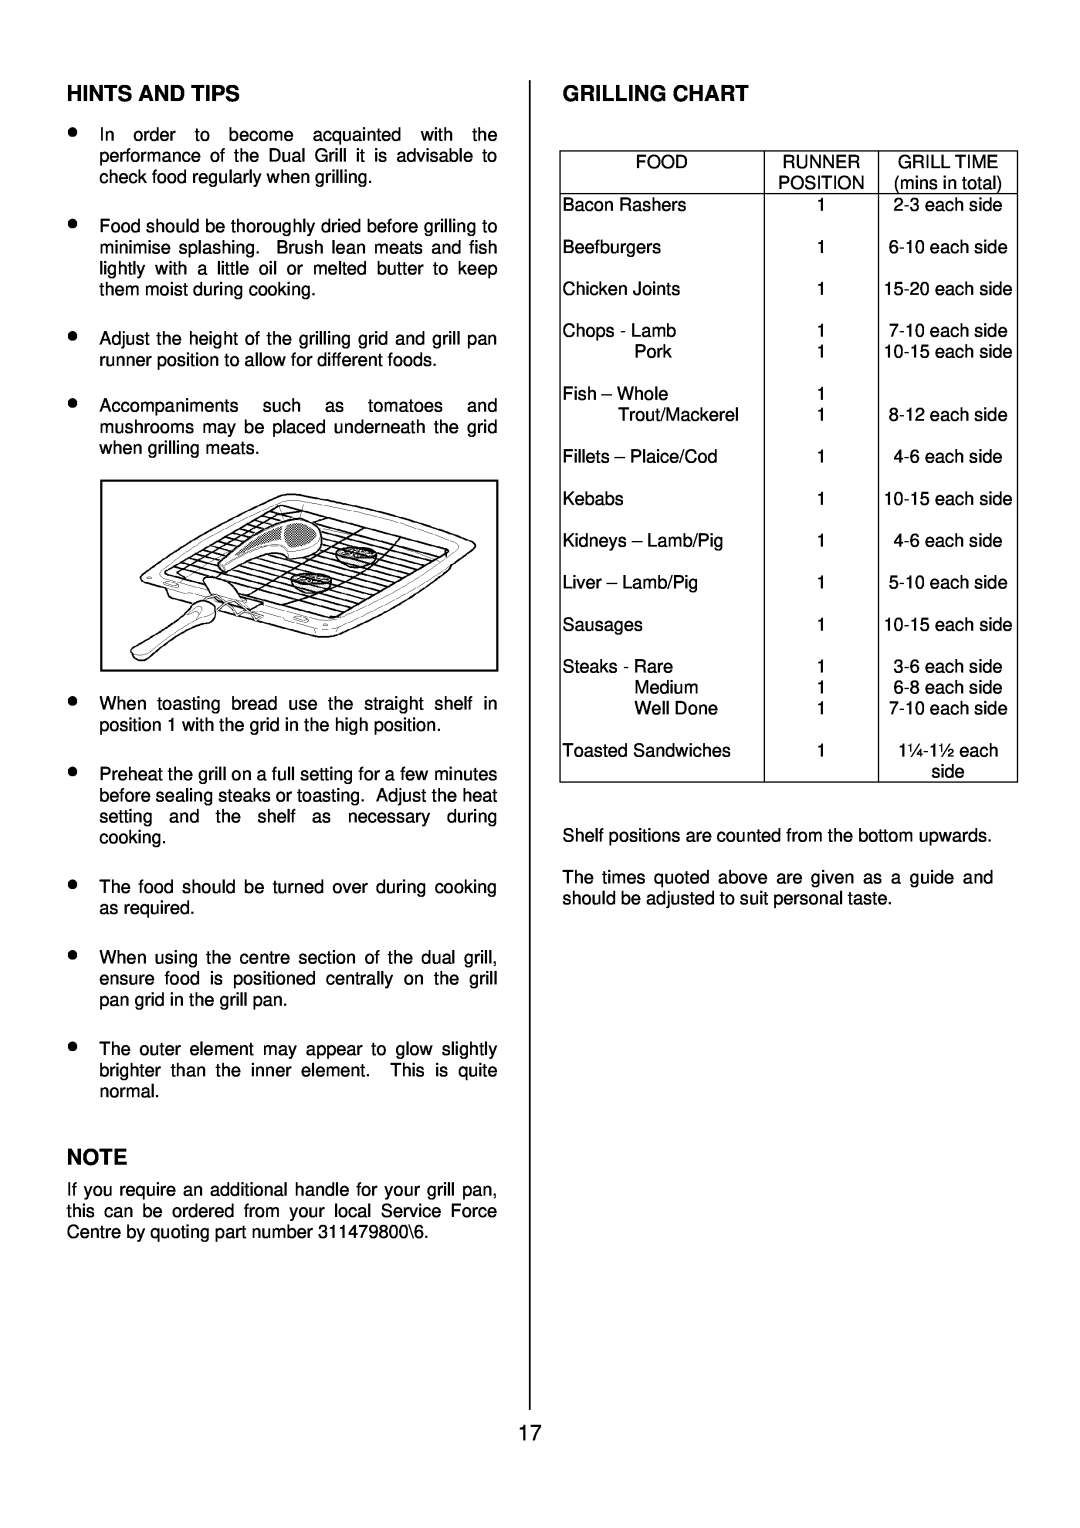 Tricity Bendix SB 422/423 installation instructions Grilling Chart, Hints And Tips 